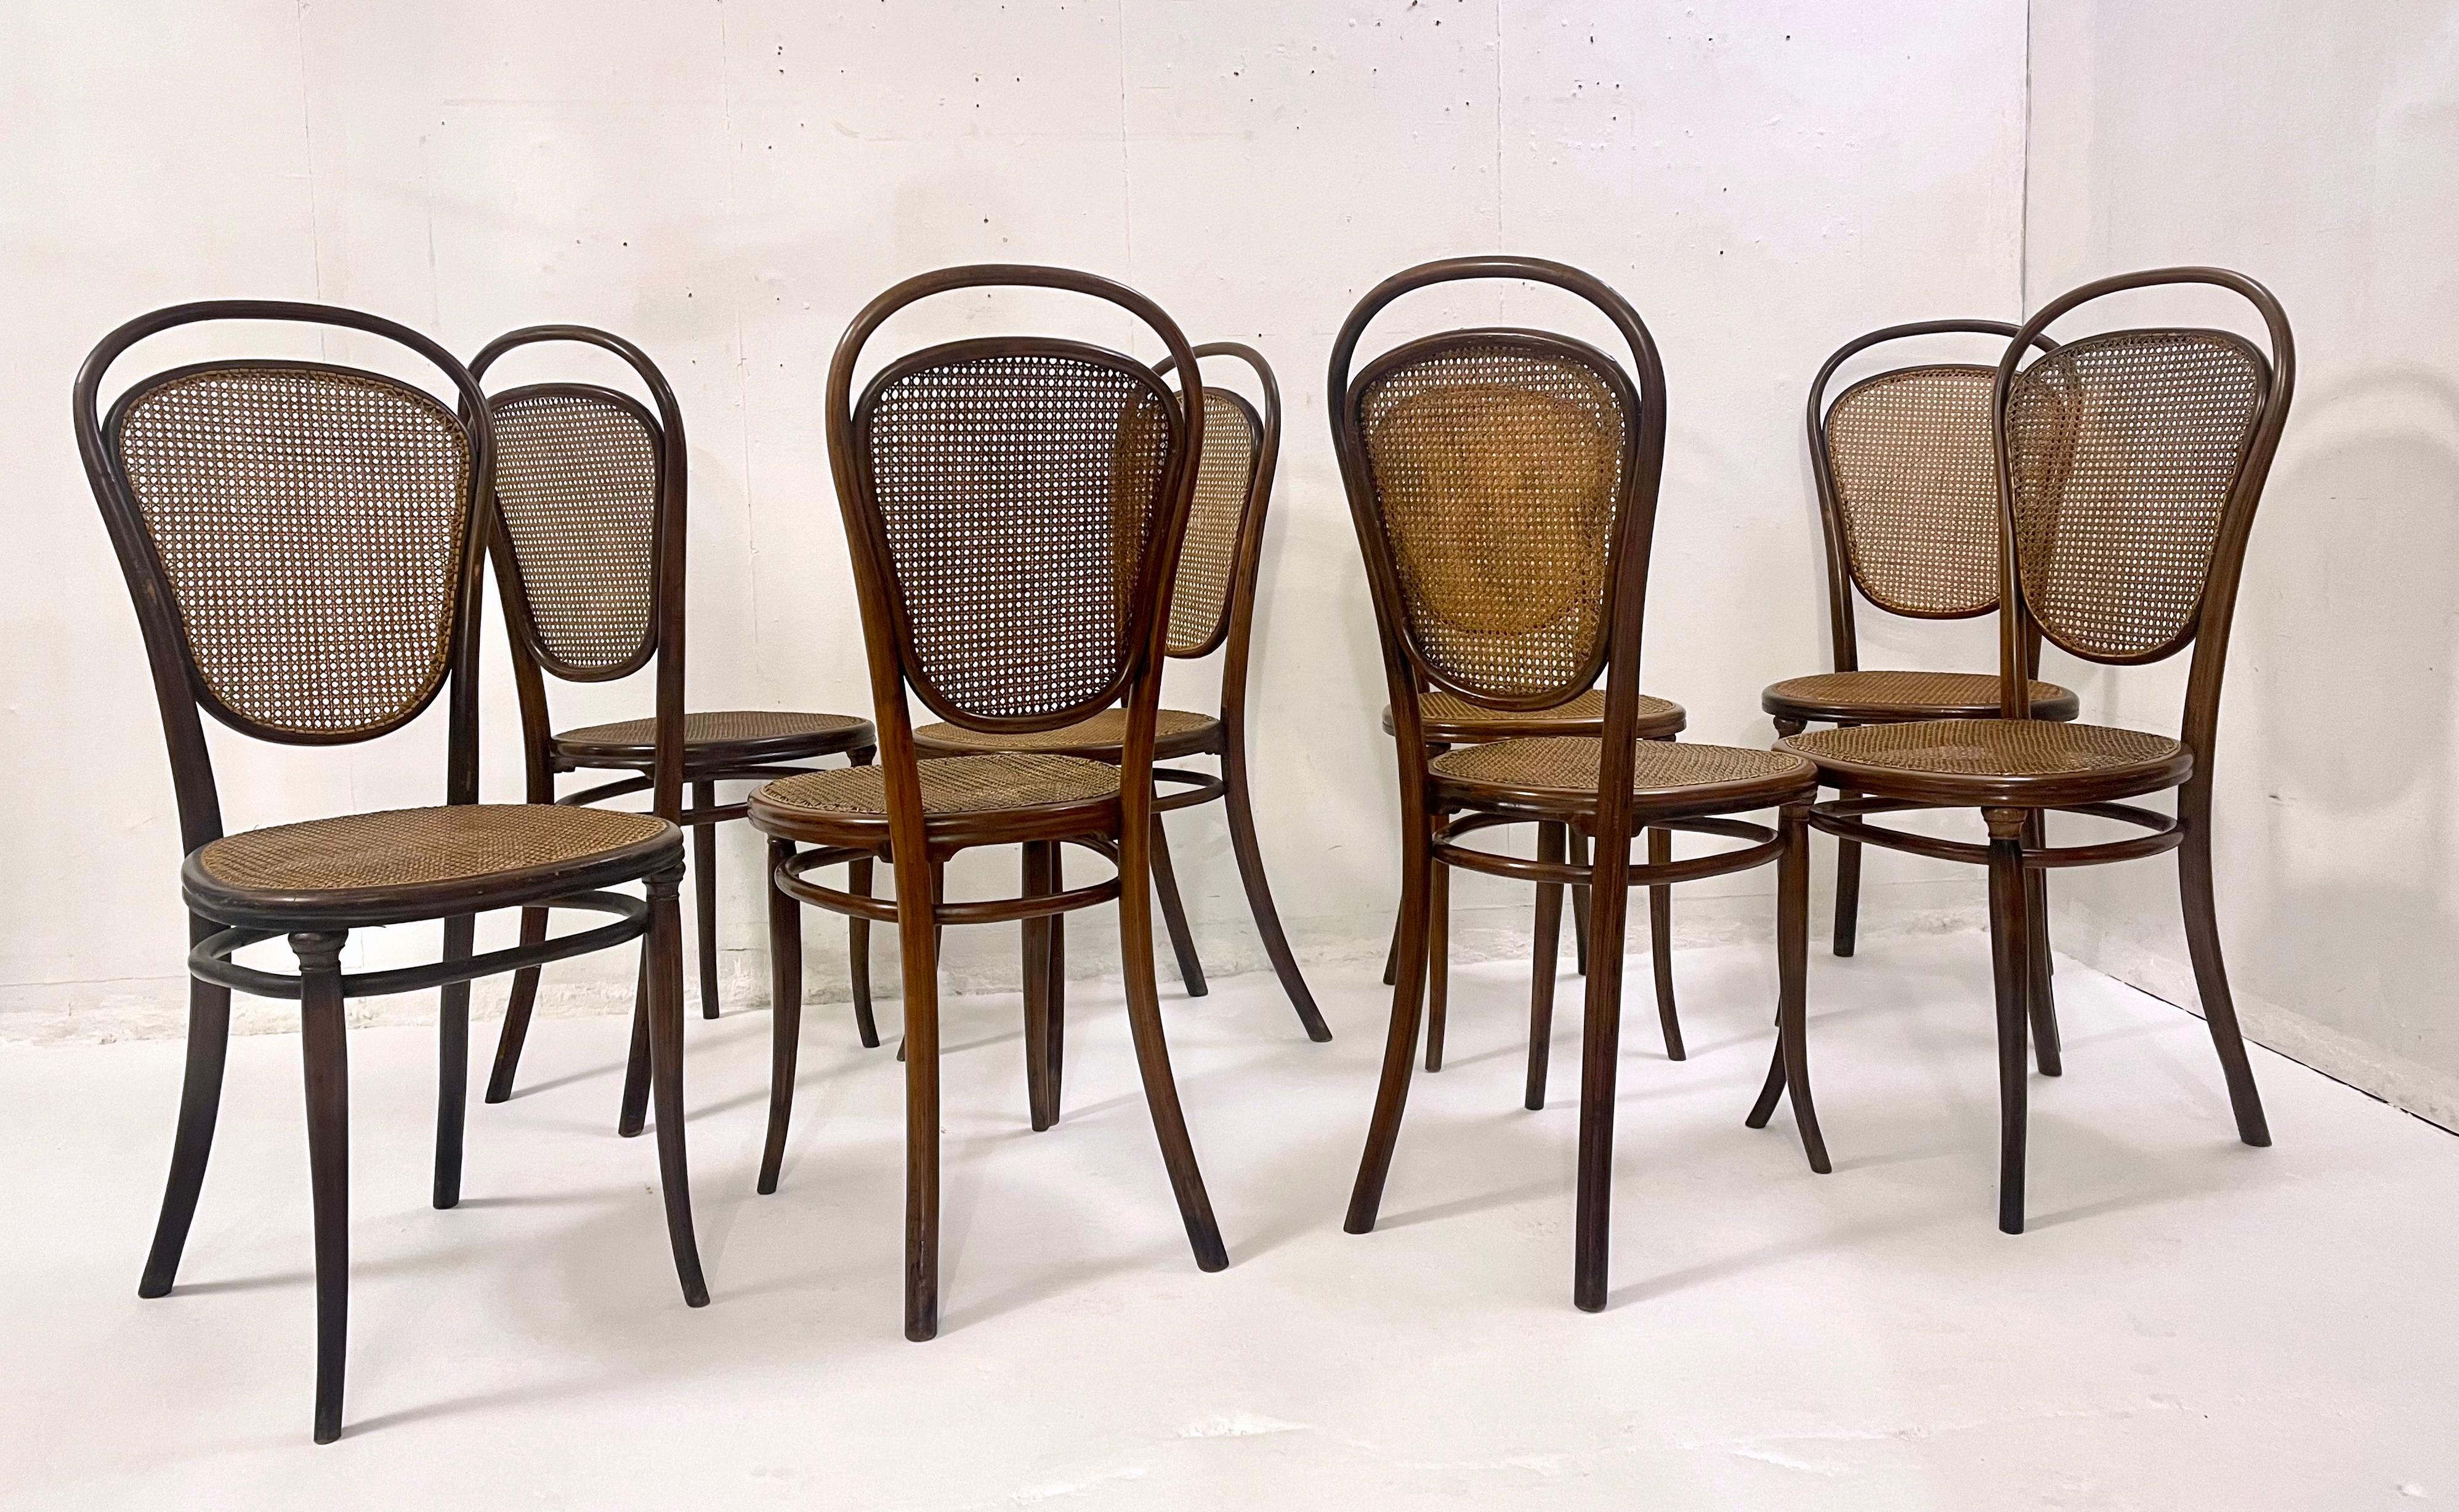 Austrian Set of 8 Bentwood Caning Chairs by Thonet, Austria 1930s For Sale